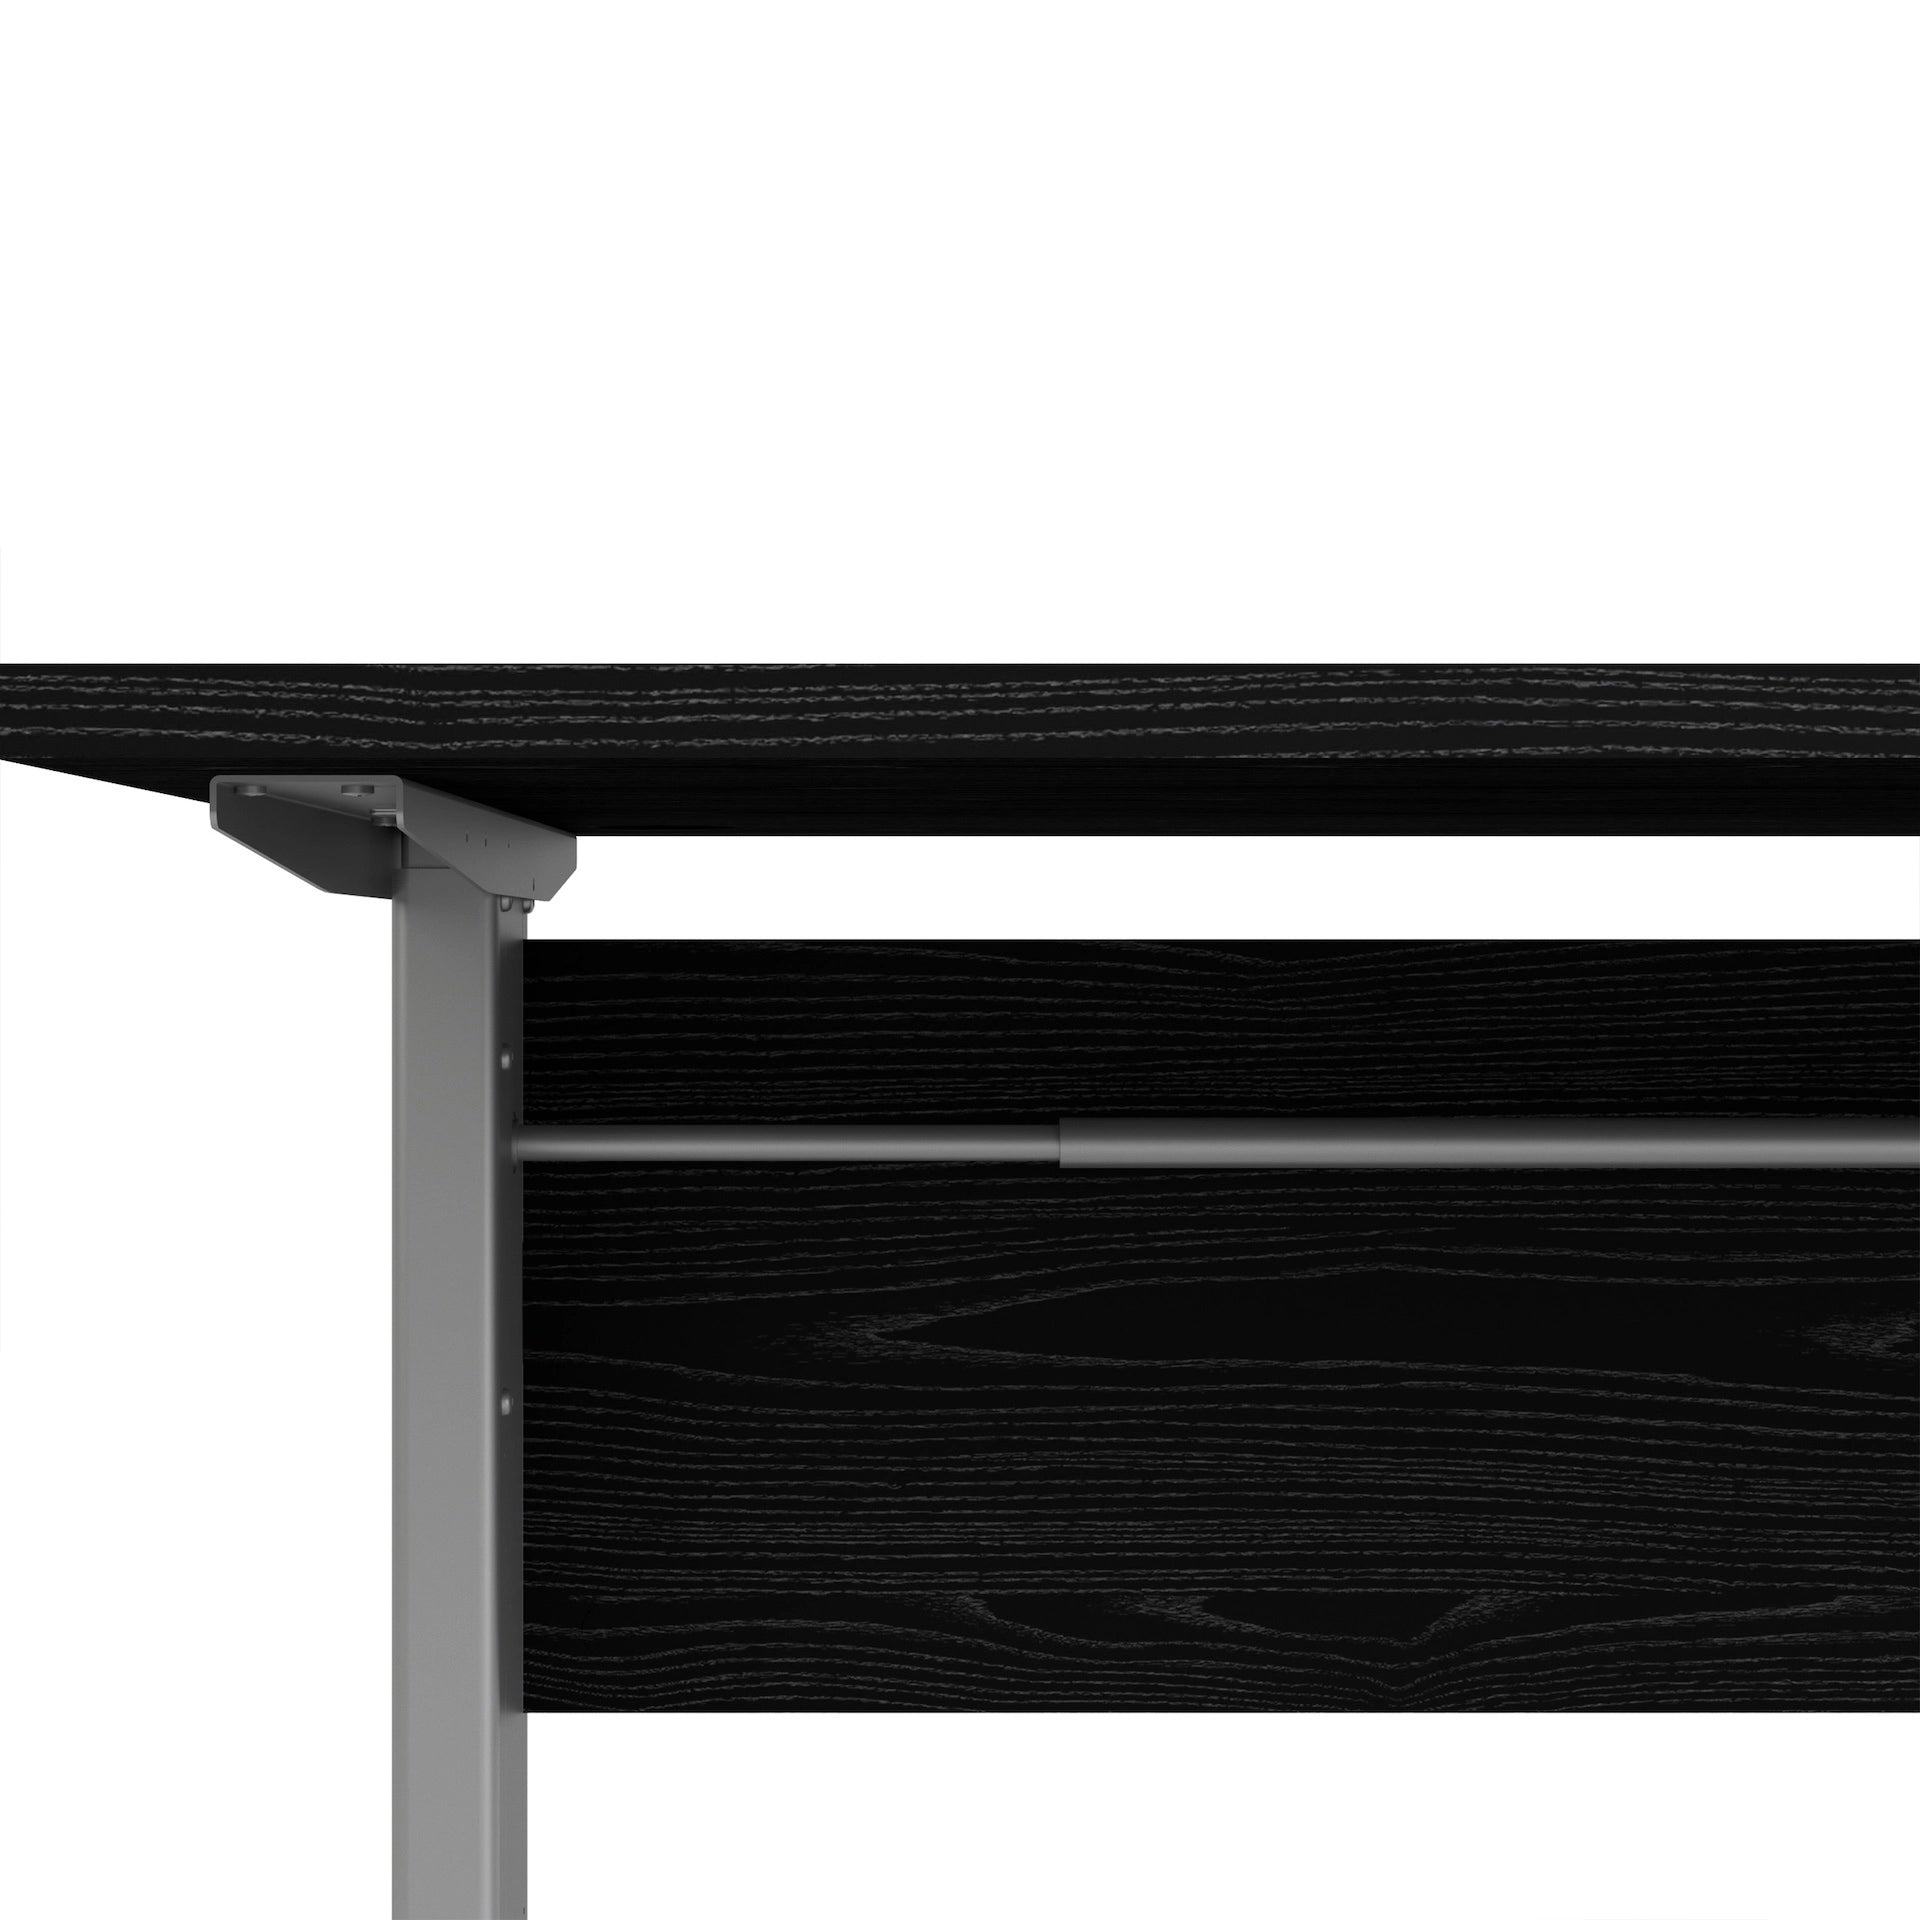 Furniture To Go Prima Desk 150cm in Black Woodgrain with Height Adjustable Legs with Electric Control in Silver Grey Steel